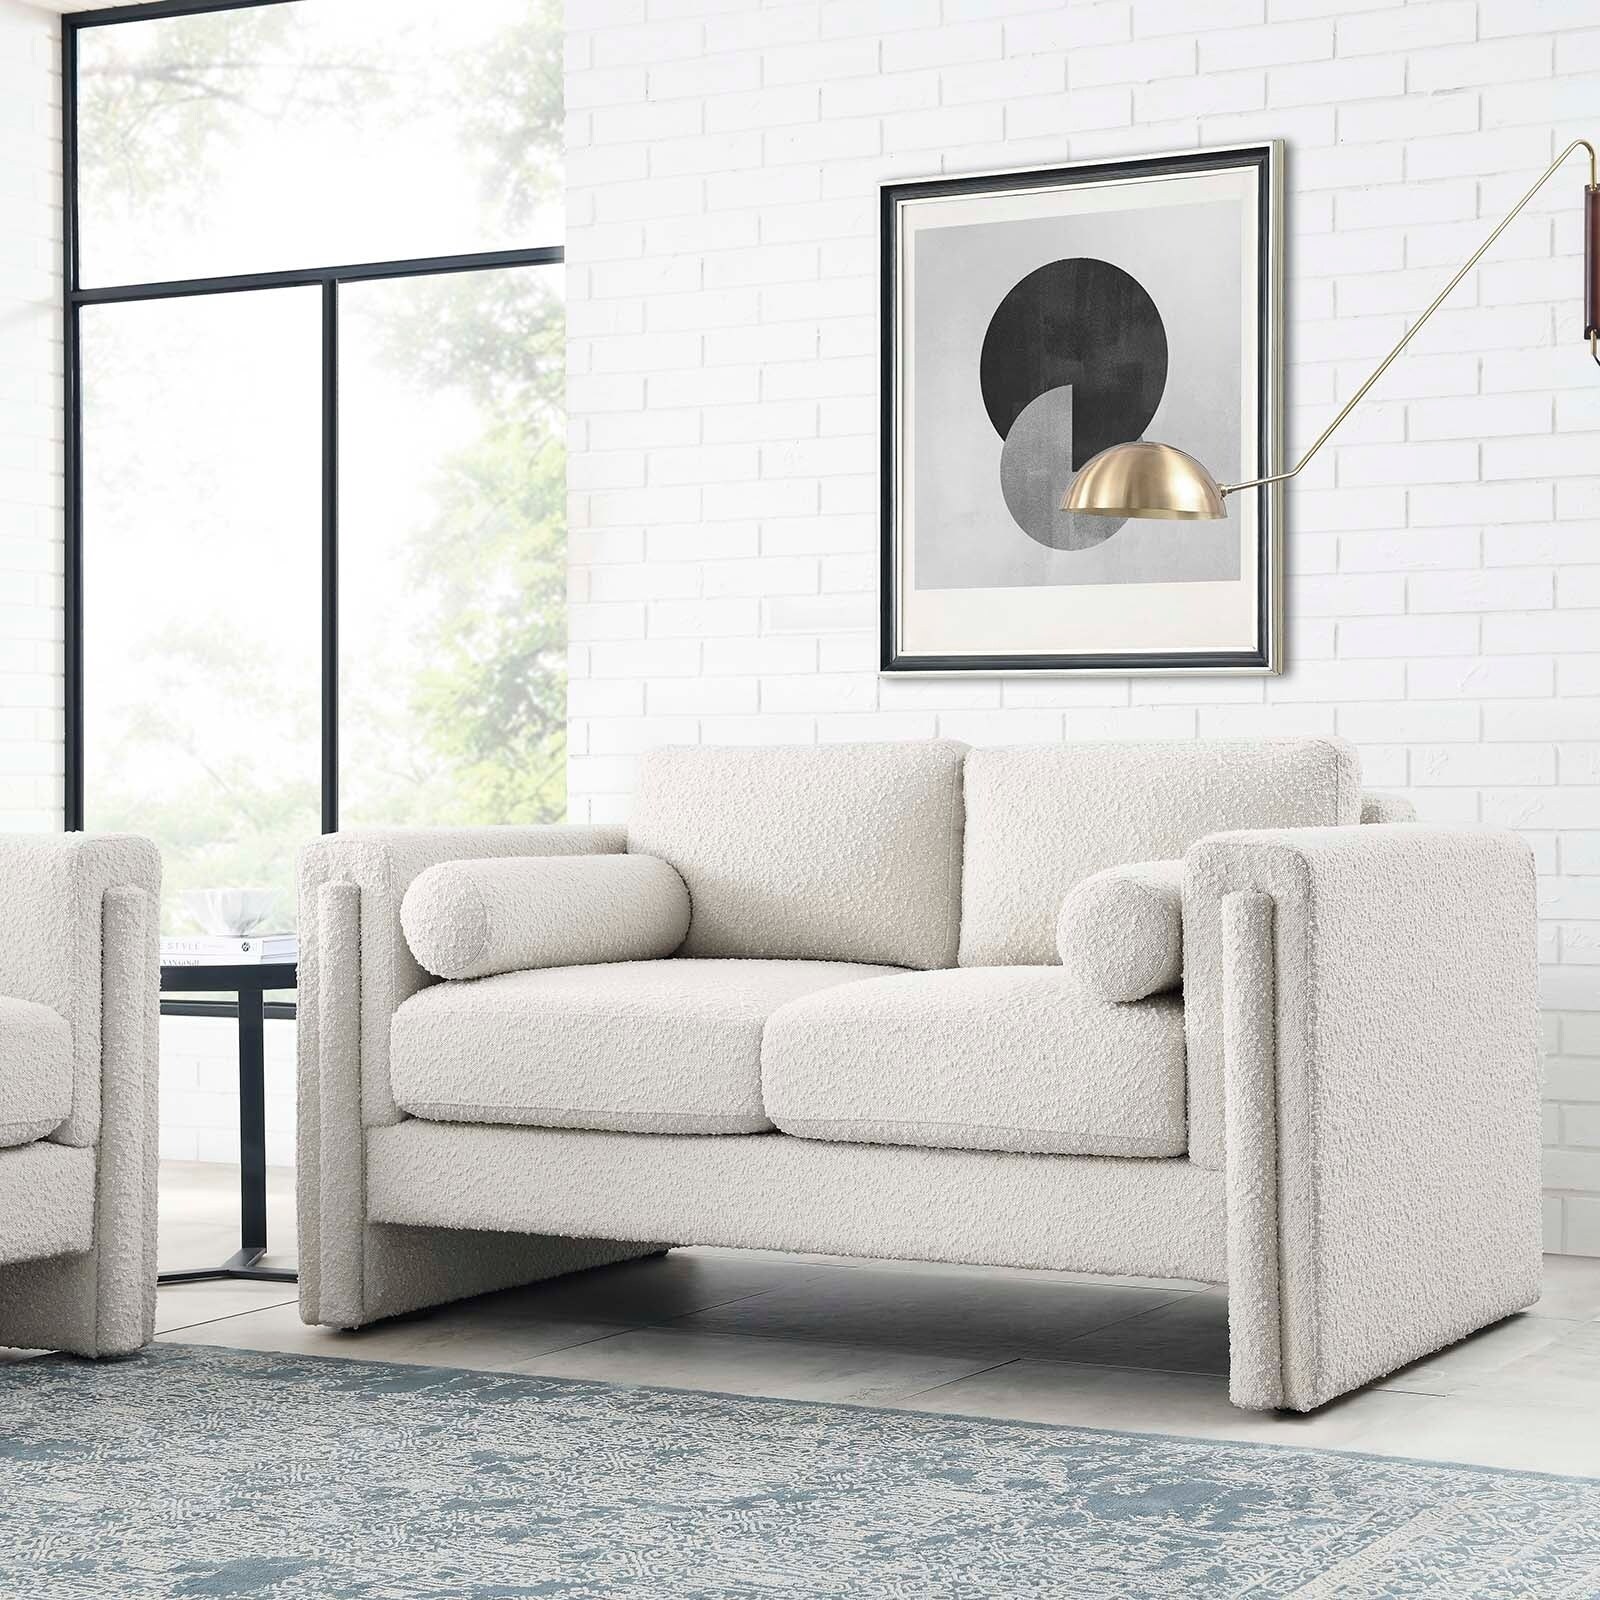 https://ak1.ostkcdn.com/images/products/is/images/direct/f80efc512e549987de5057effec0119d029fcb4b/JASIWAY-Modern-Upholstered-Sofa-Loveseat-with-2-Pillows.jpg